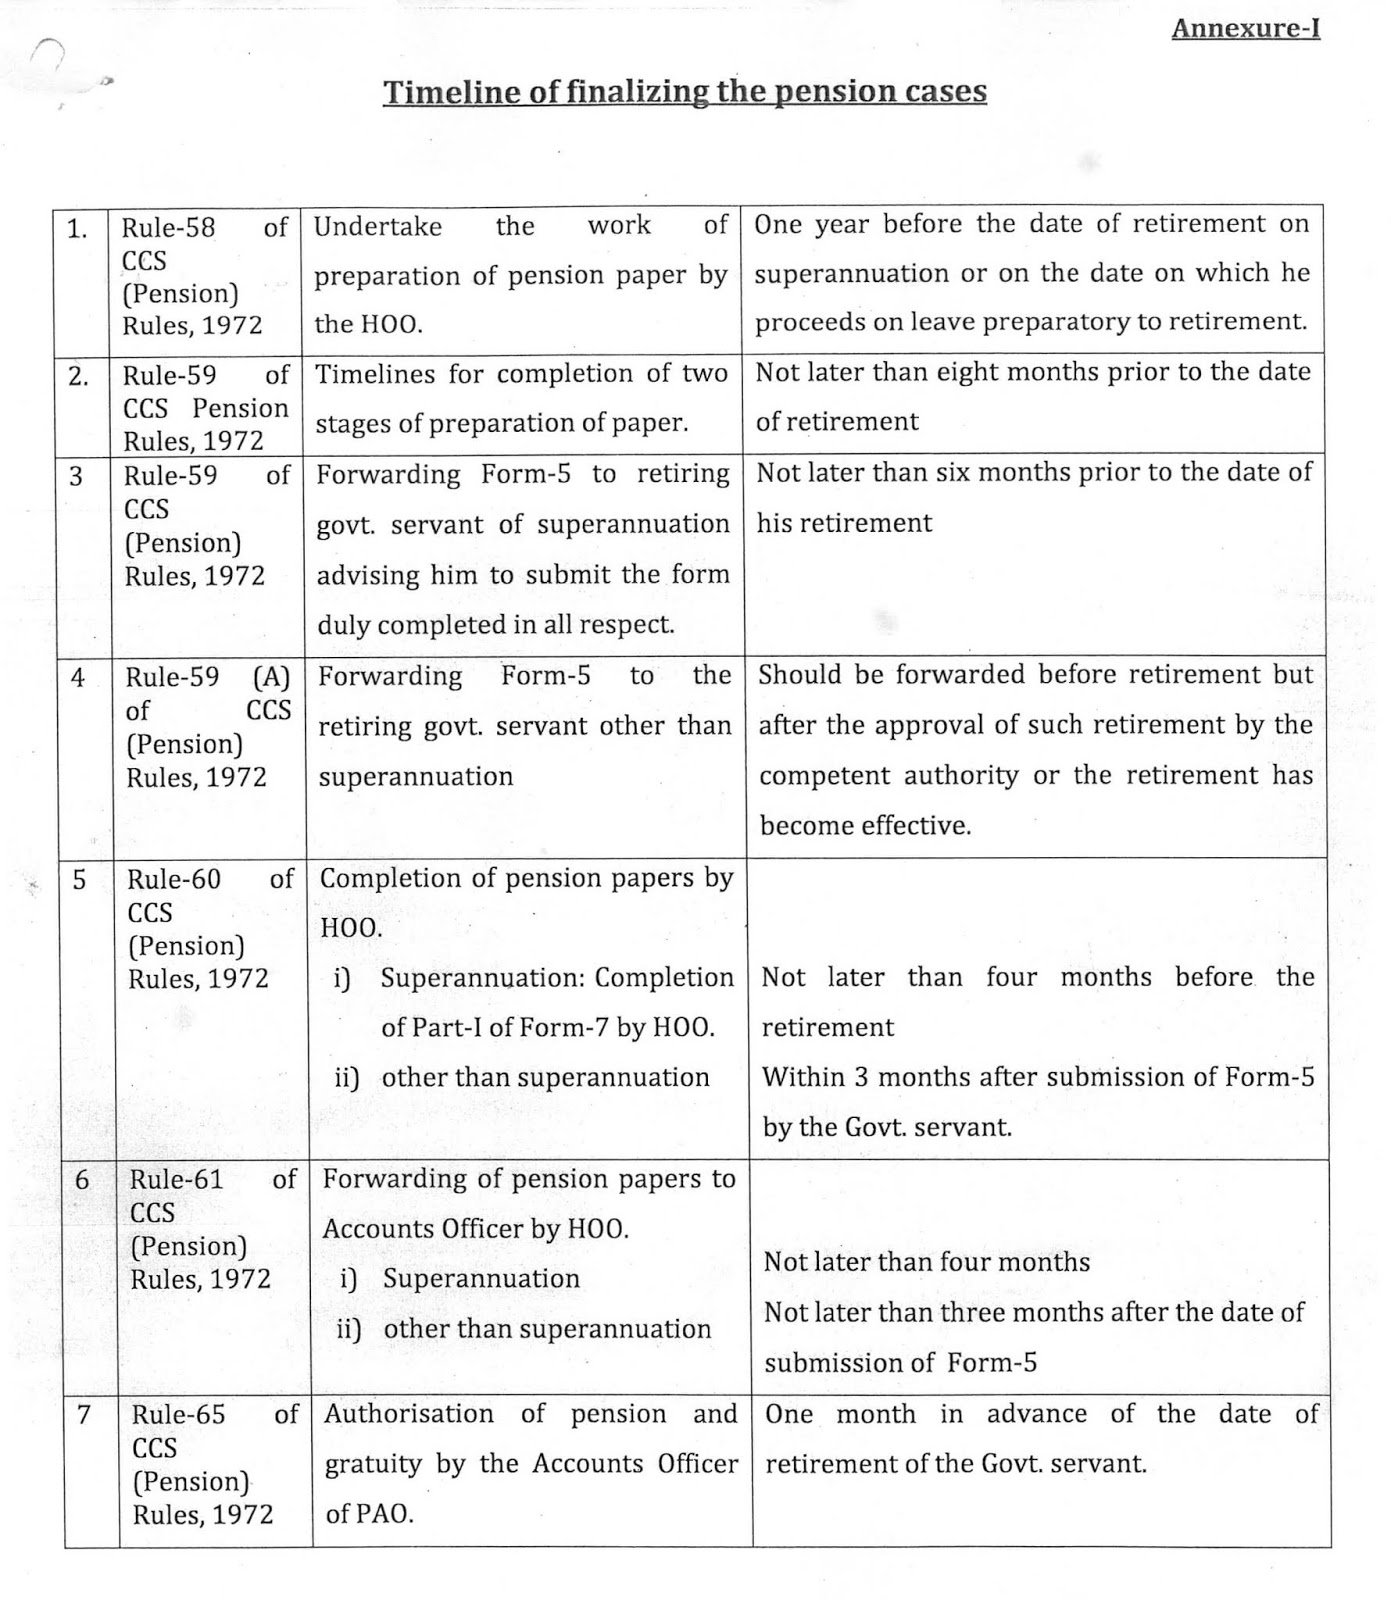 7 Steps of Timeline of finalizing the pension case as prescribed in CCS (Pension) Rules, 1972